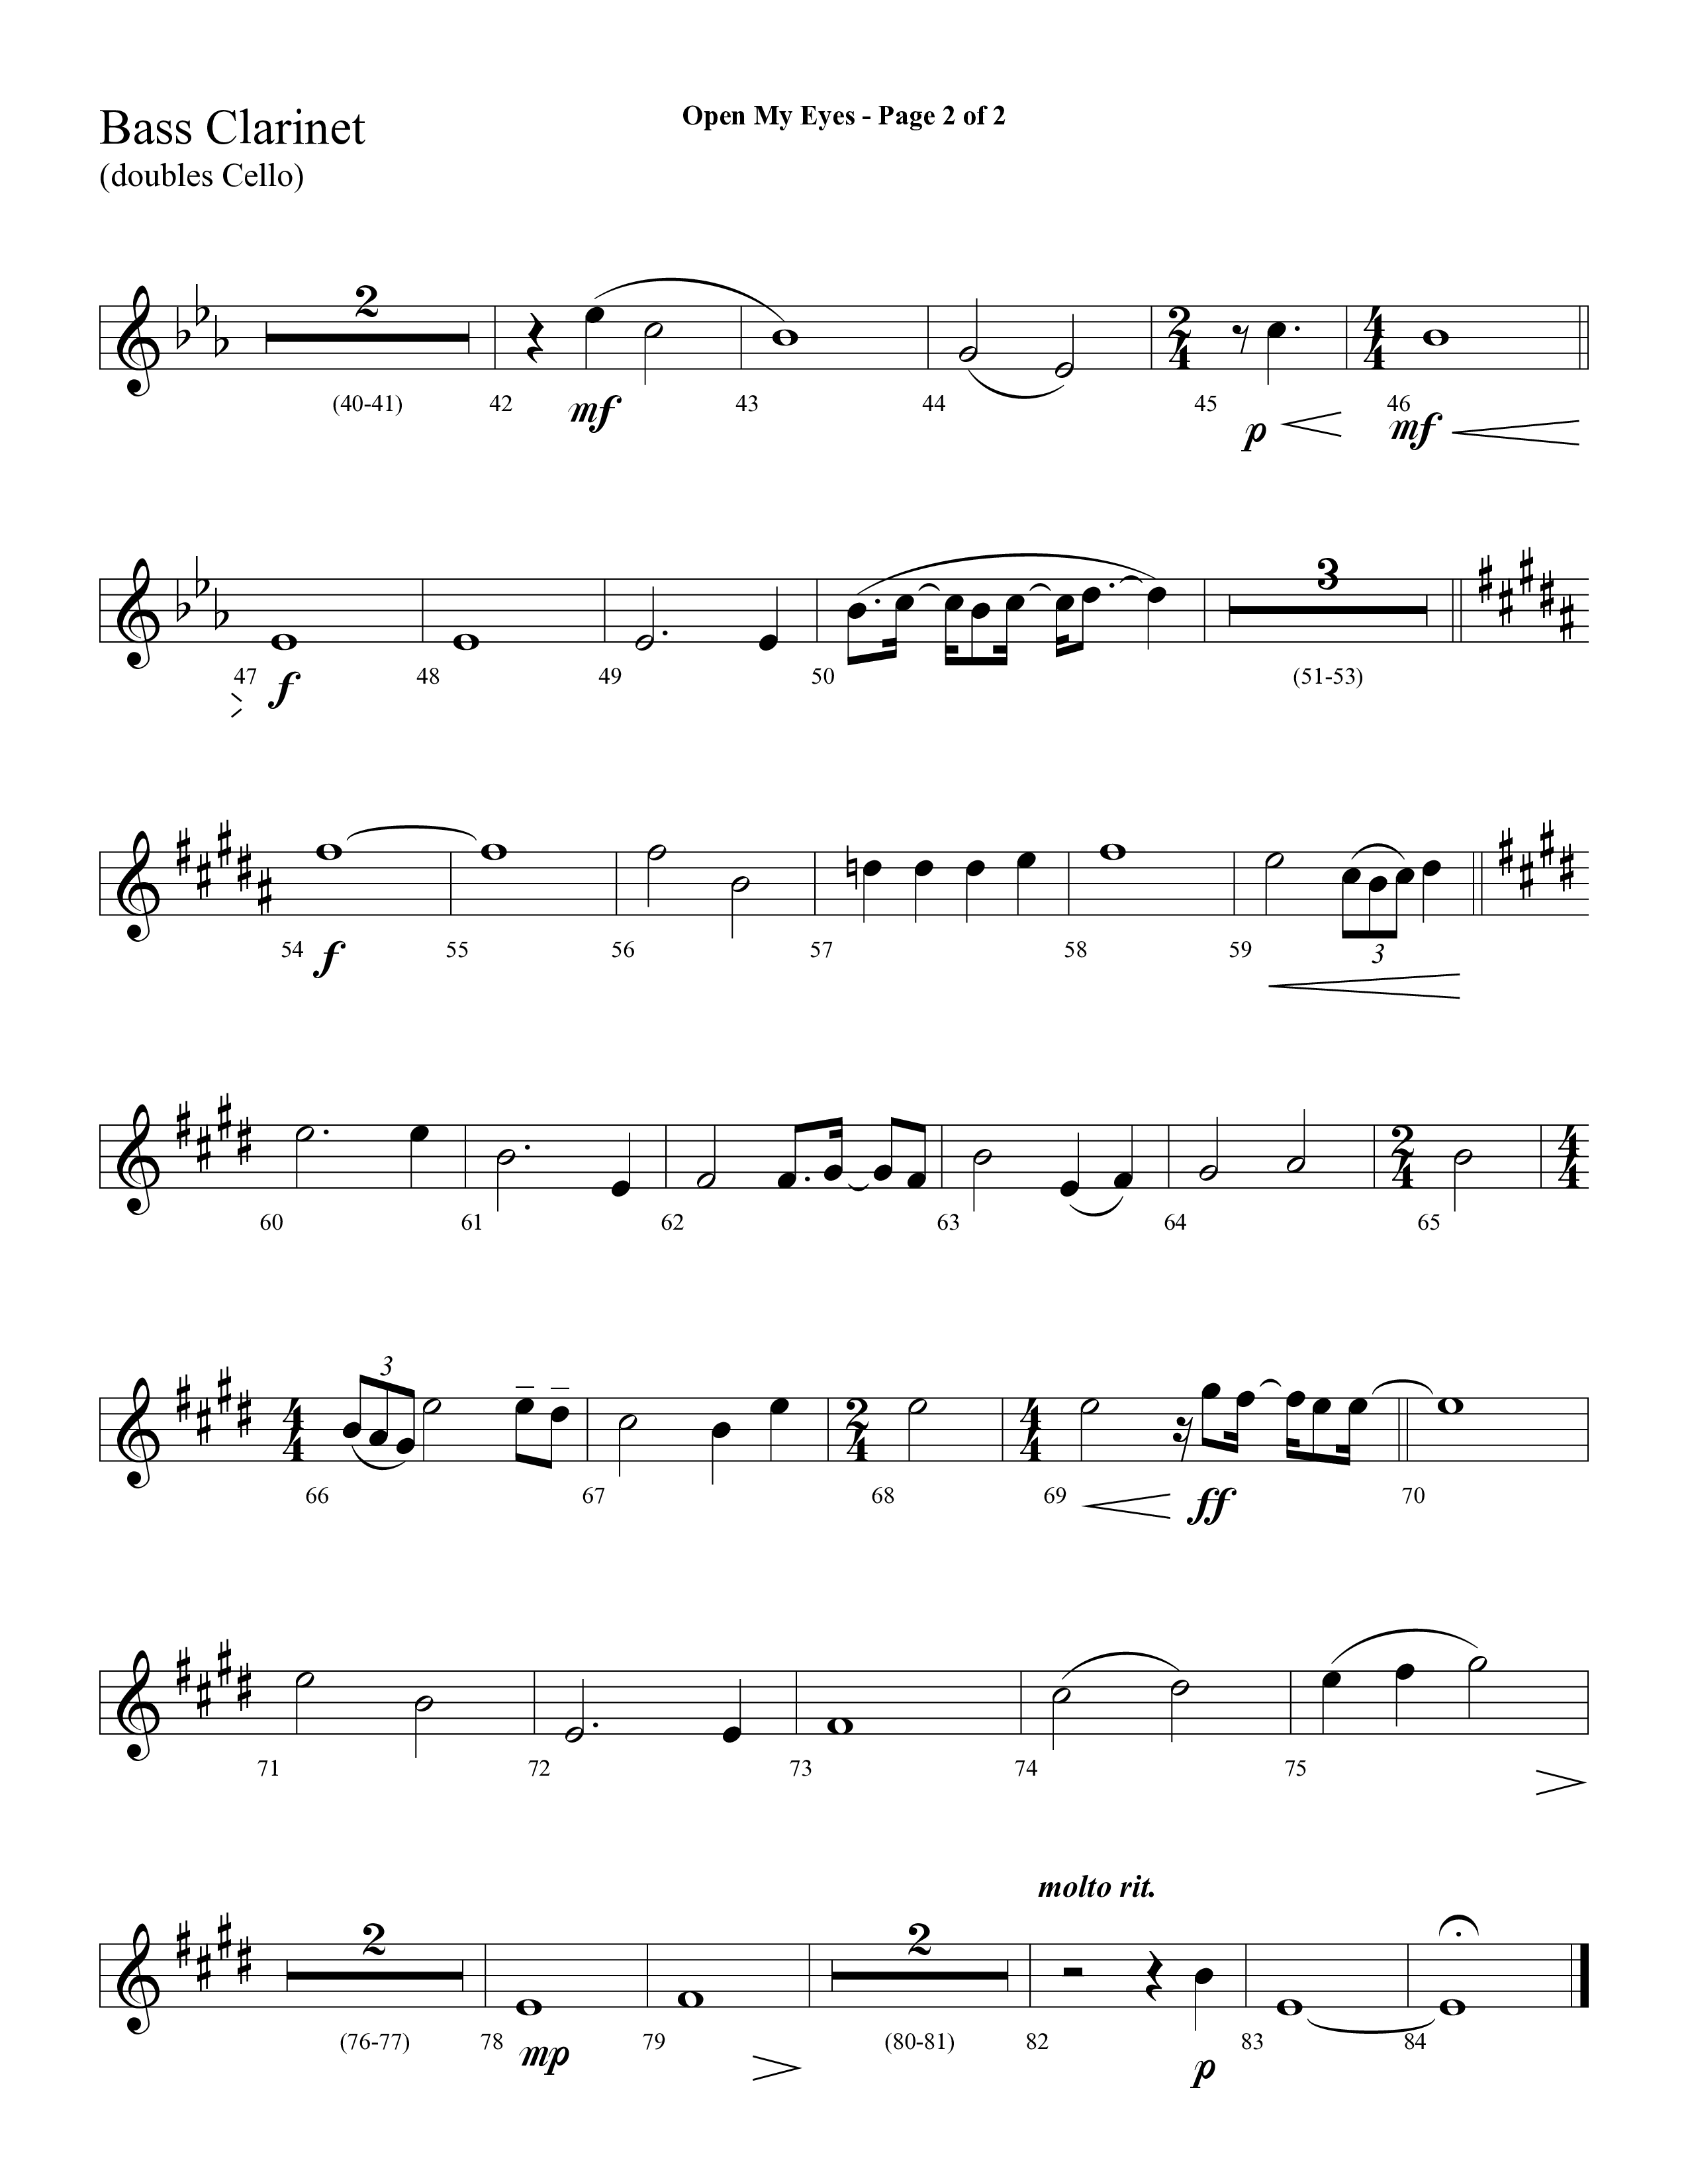 Open My Eyes (with Be Thou My Vision) (Choral Anthem SATB) Bass Clarinet (Arr. Cliff Duren / Lifeway Choral)